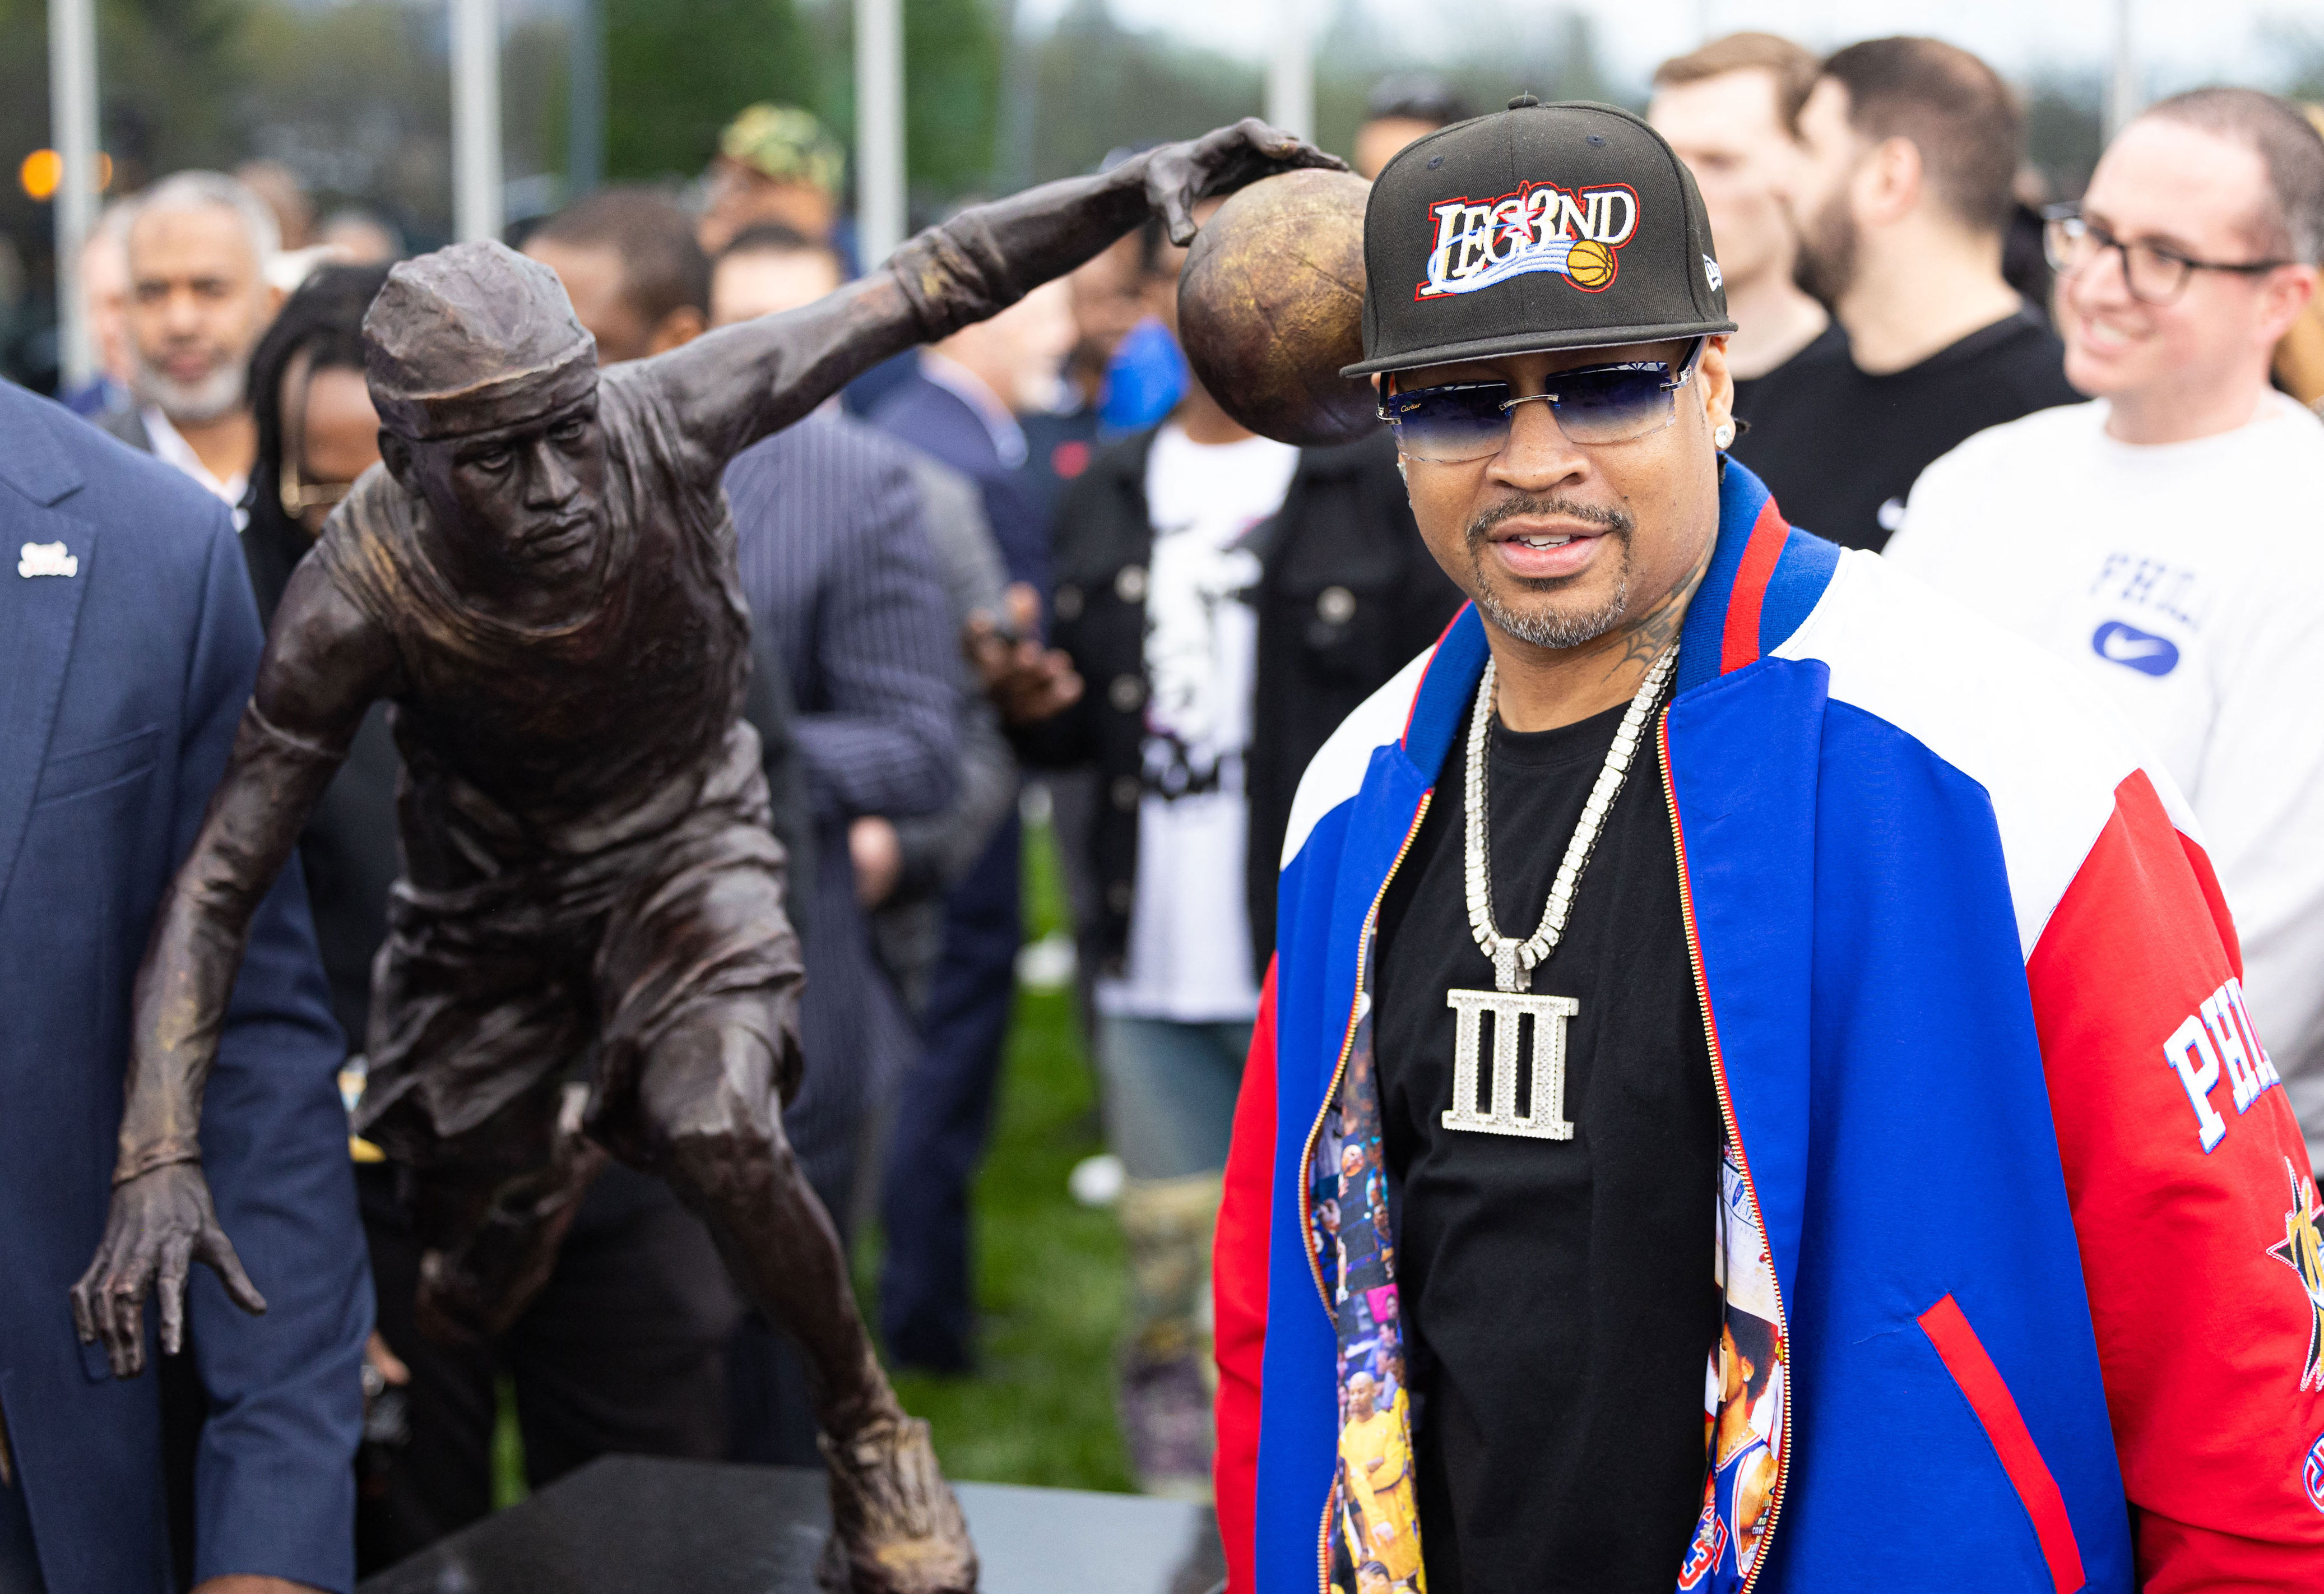 76ers' statue for allen iverson draws jokes, outrage due to misunderstanding: 'that was disrespectful'